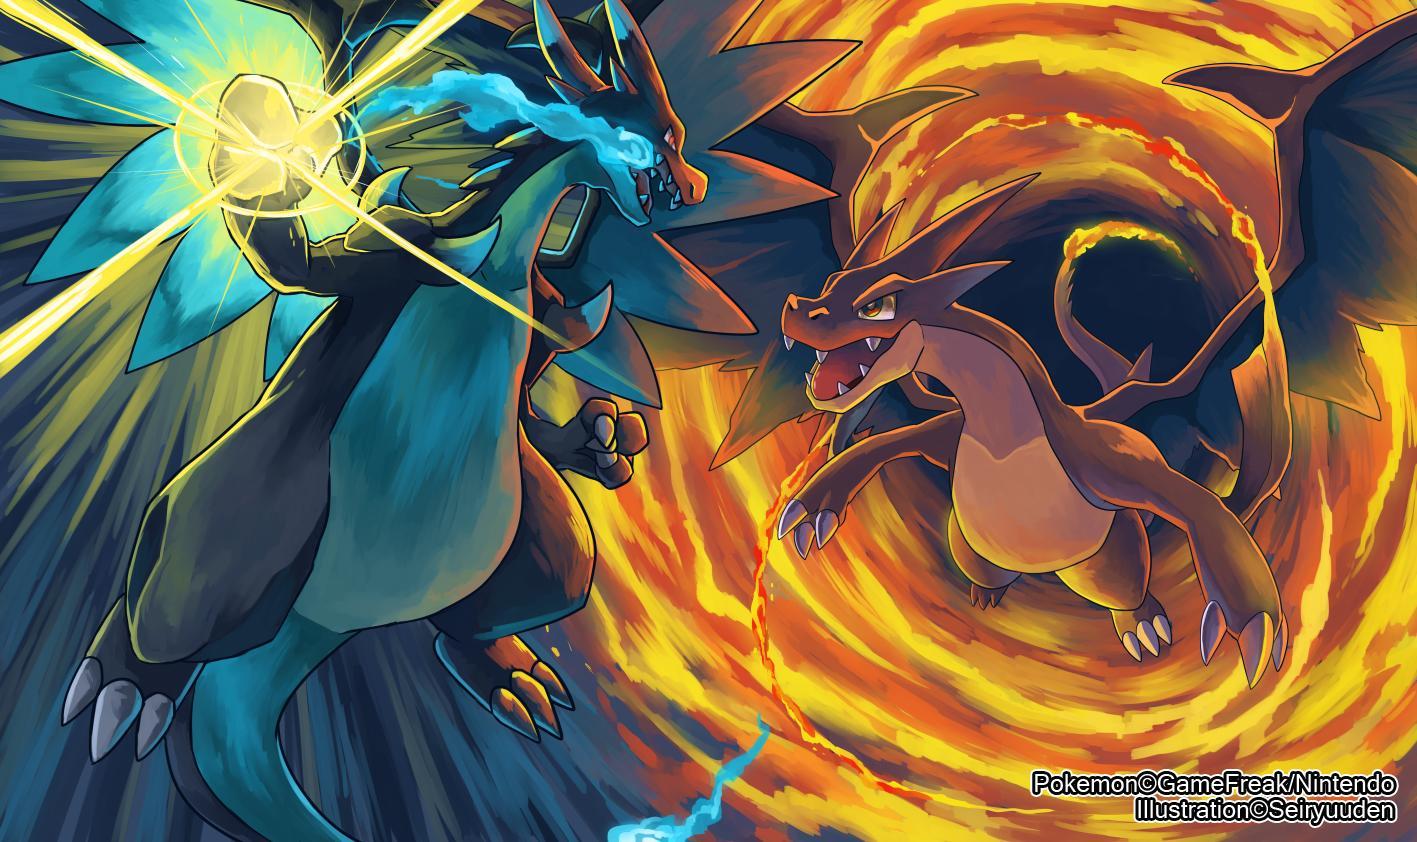 Mega Charizard X Versus Y !! My wallpaper atm Credits to the artist